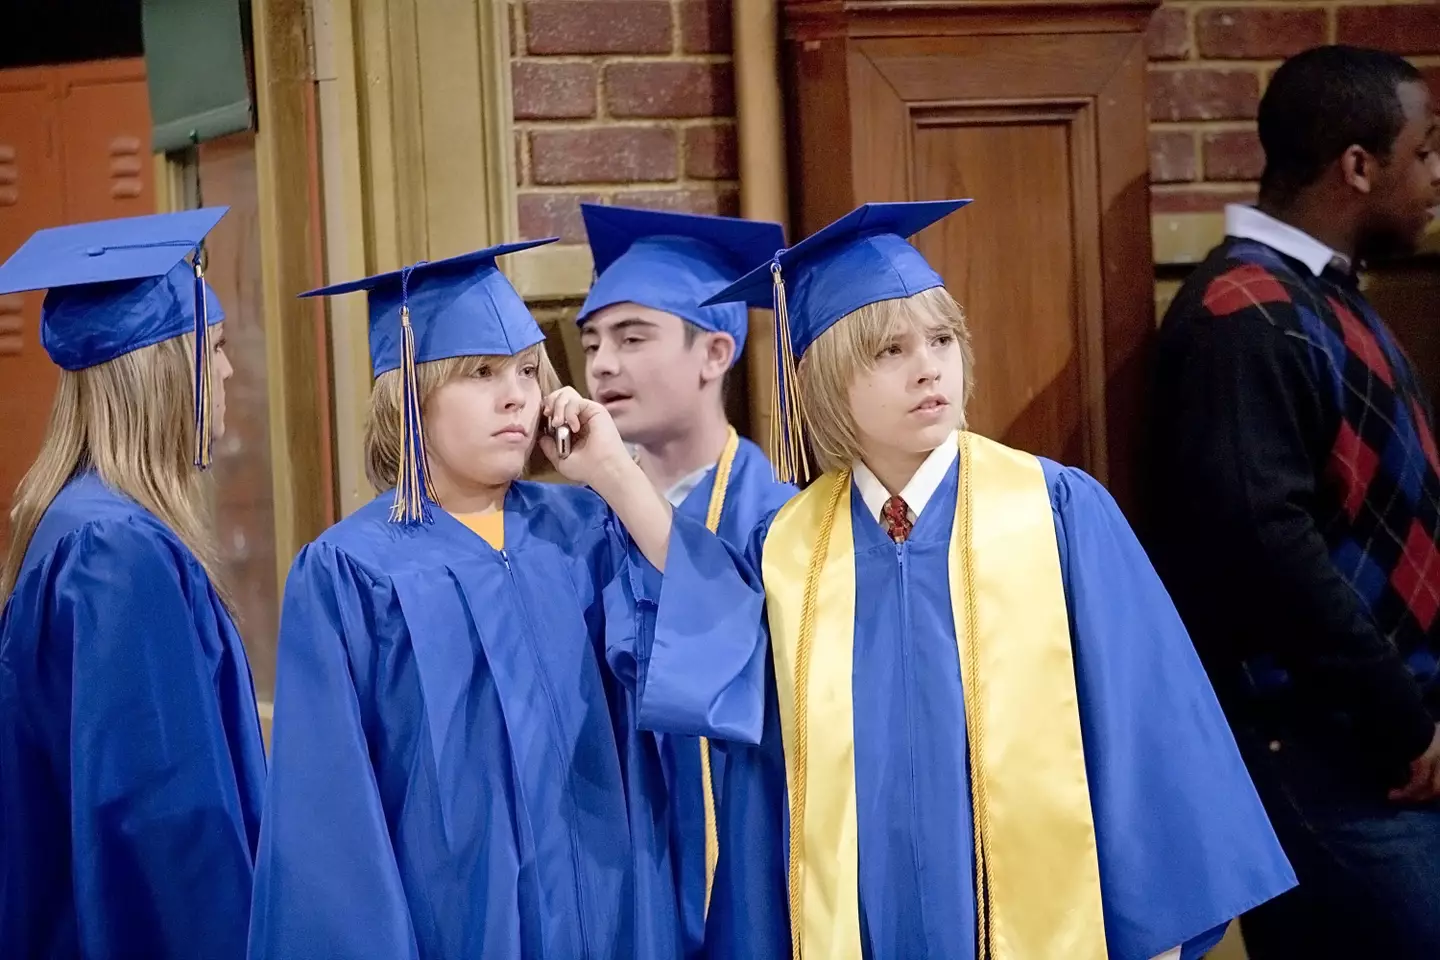 Cole Sprouse said The Suite Life Of Zack and Cody had a 'live-saving' impact.